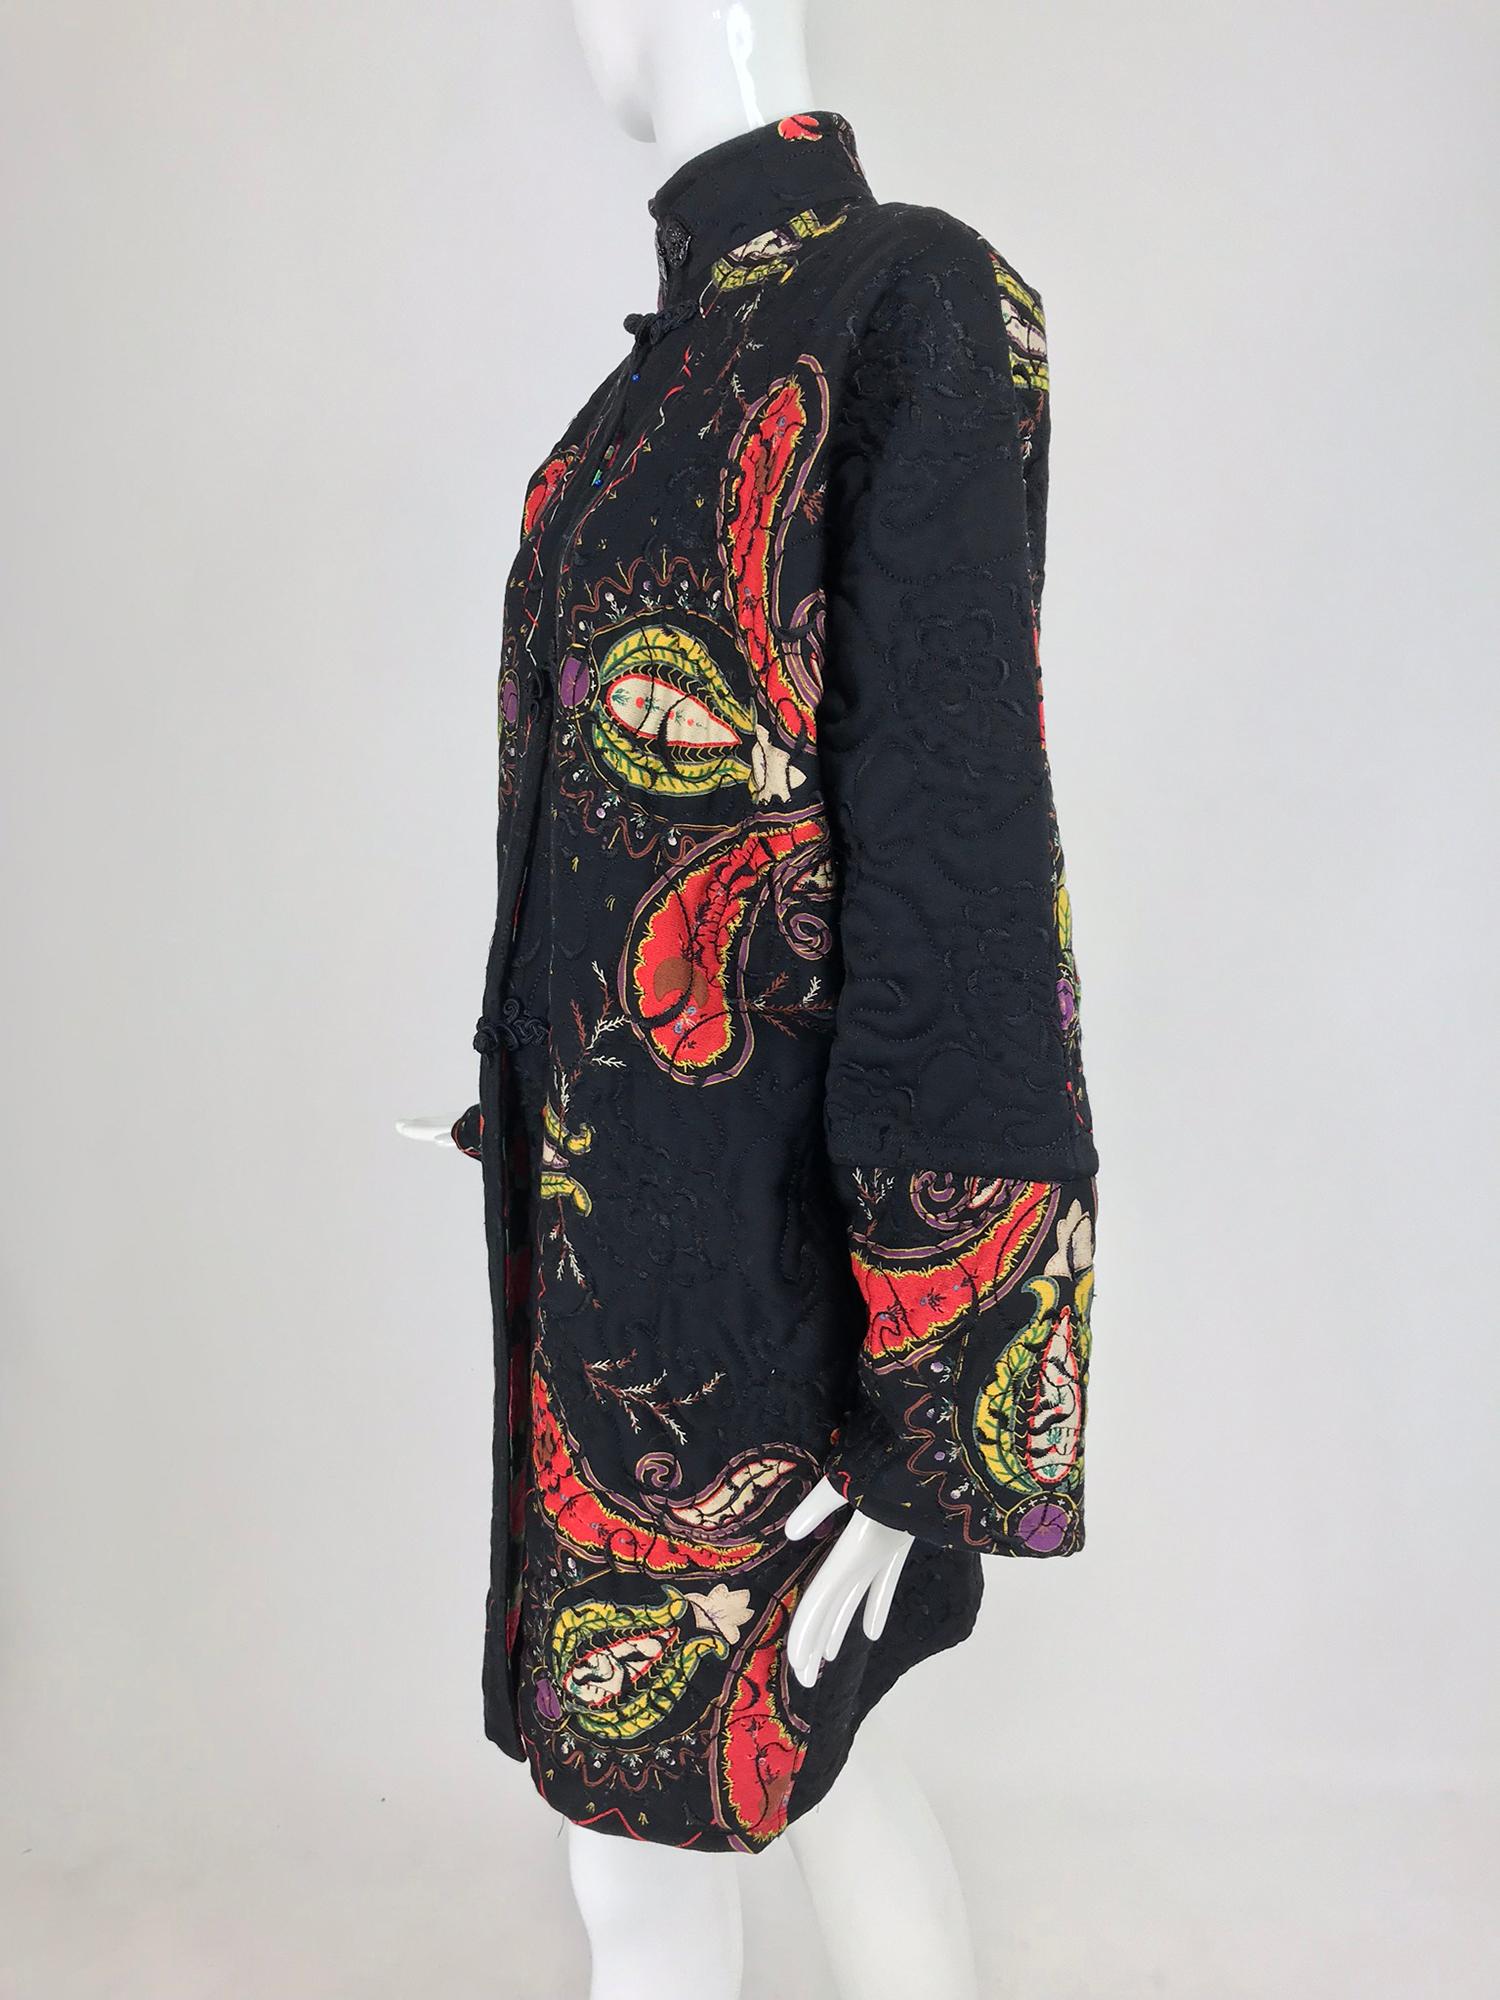 Ungaro Parallele applique quilted coat from the 1980s. This coat has a bohemian vibe with a chic touch lent by Ungaro. The quilted coat has raglan sleeves that taper to the wrist, on seam side pockets. Semi full through the body, it tapers to the